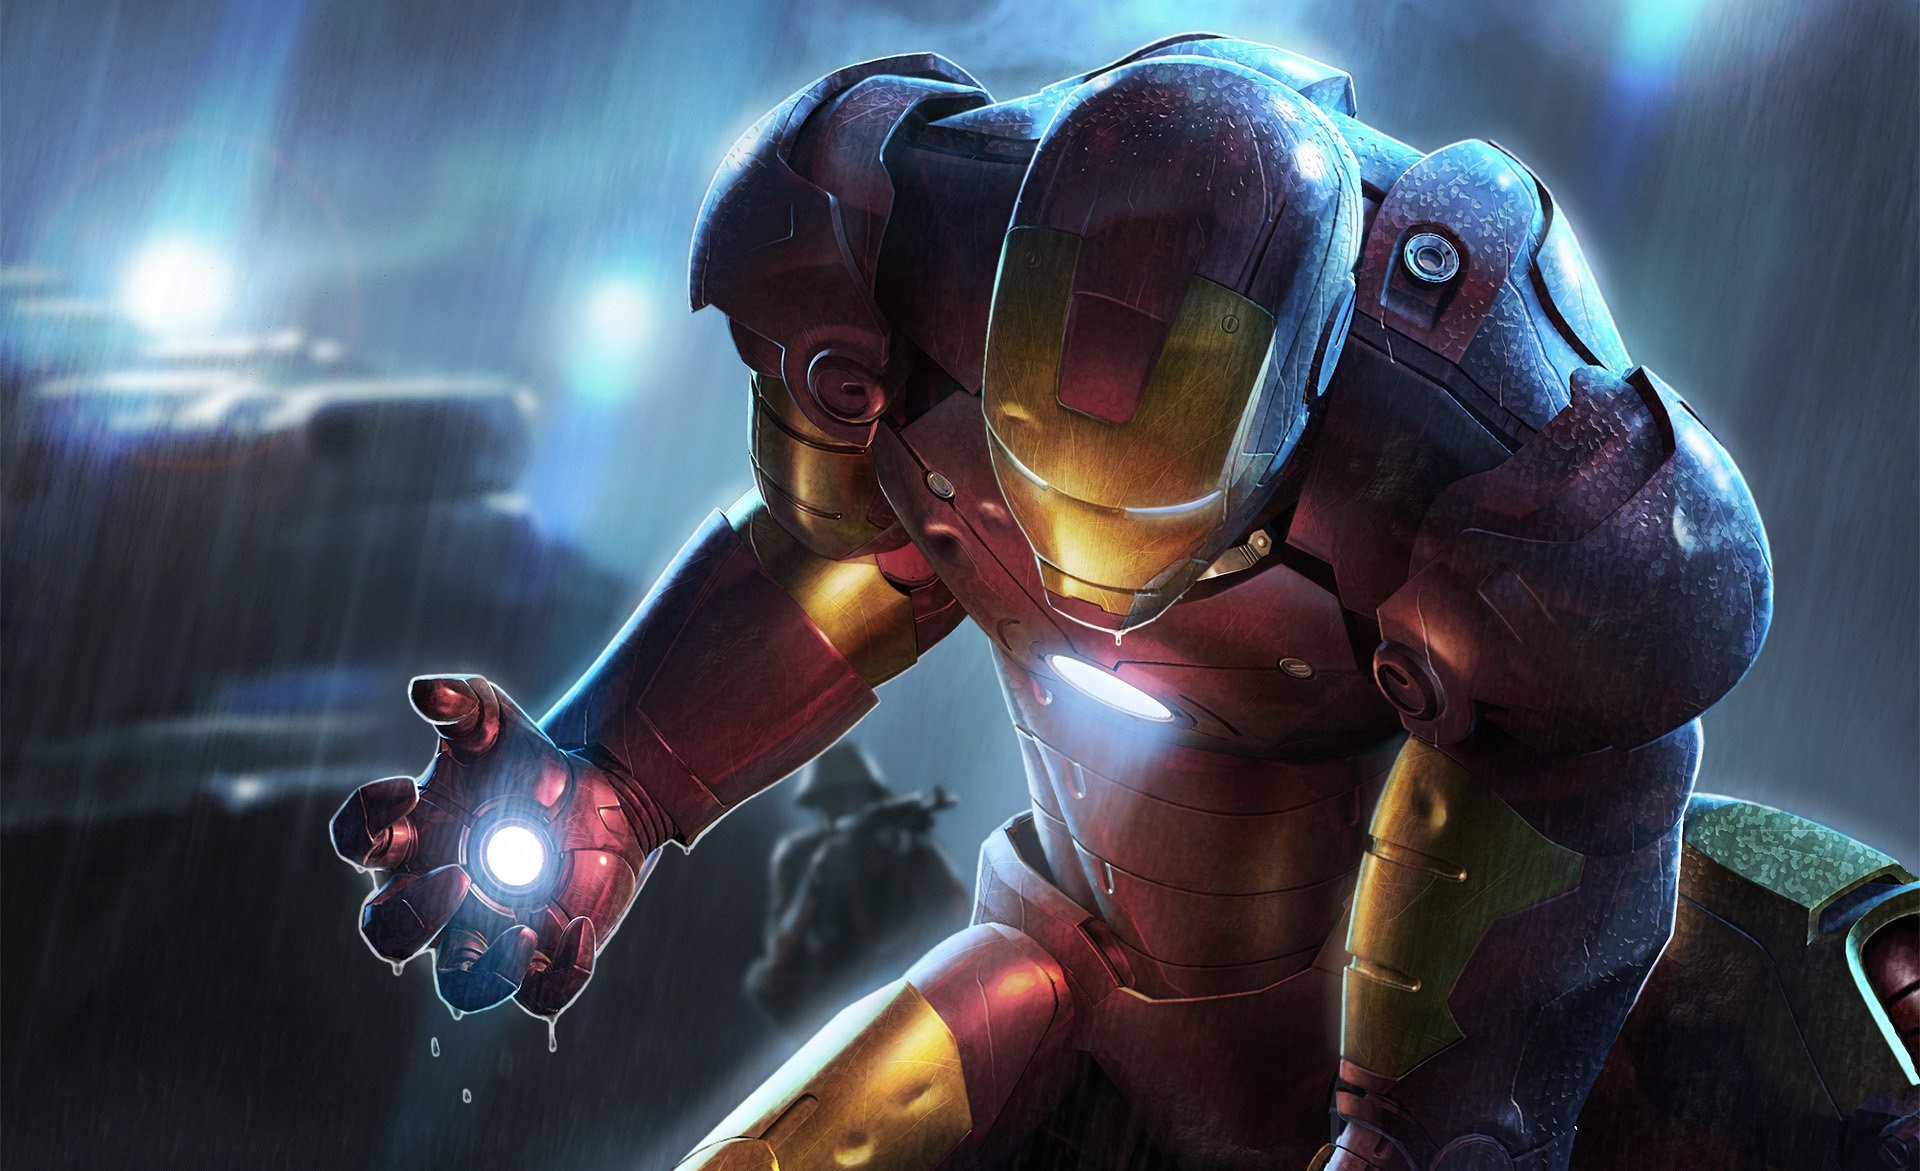 Mobile wallpaper: Iron Man, Cinema, 13873 download the picture for free.